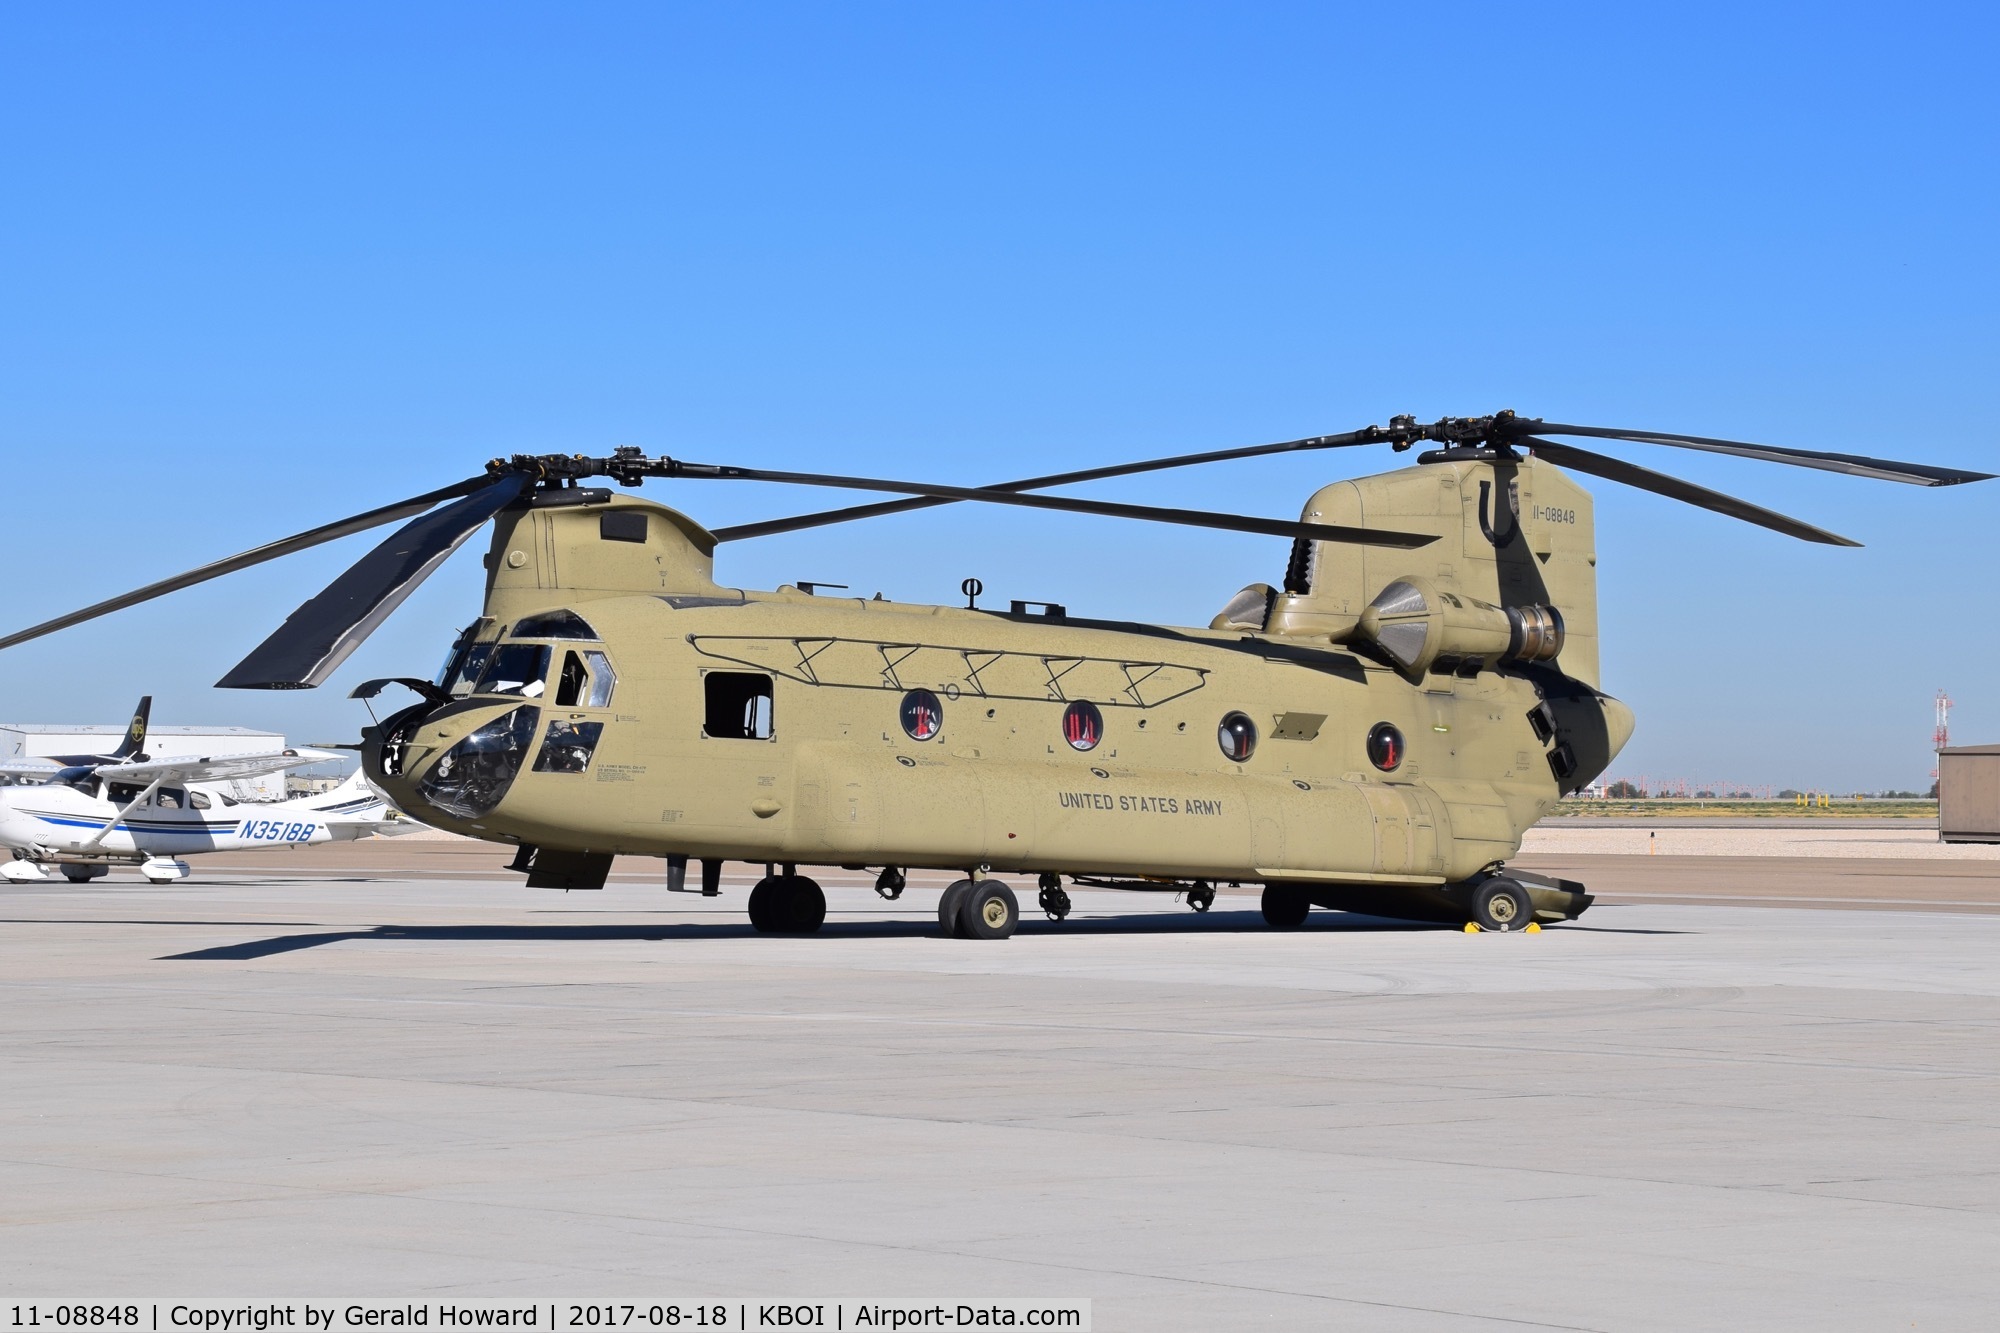 11-08848, 2011 Boeing CH-47F Chinook C/N M.8848, Parked on the south GA ramp. The horseshoe on the tail belongs to the 2nd Battalion, 4th AV Brigade, Fort Carson, CO.